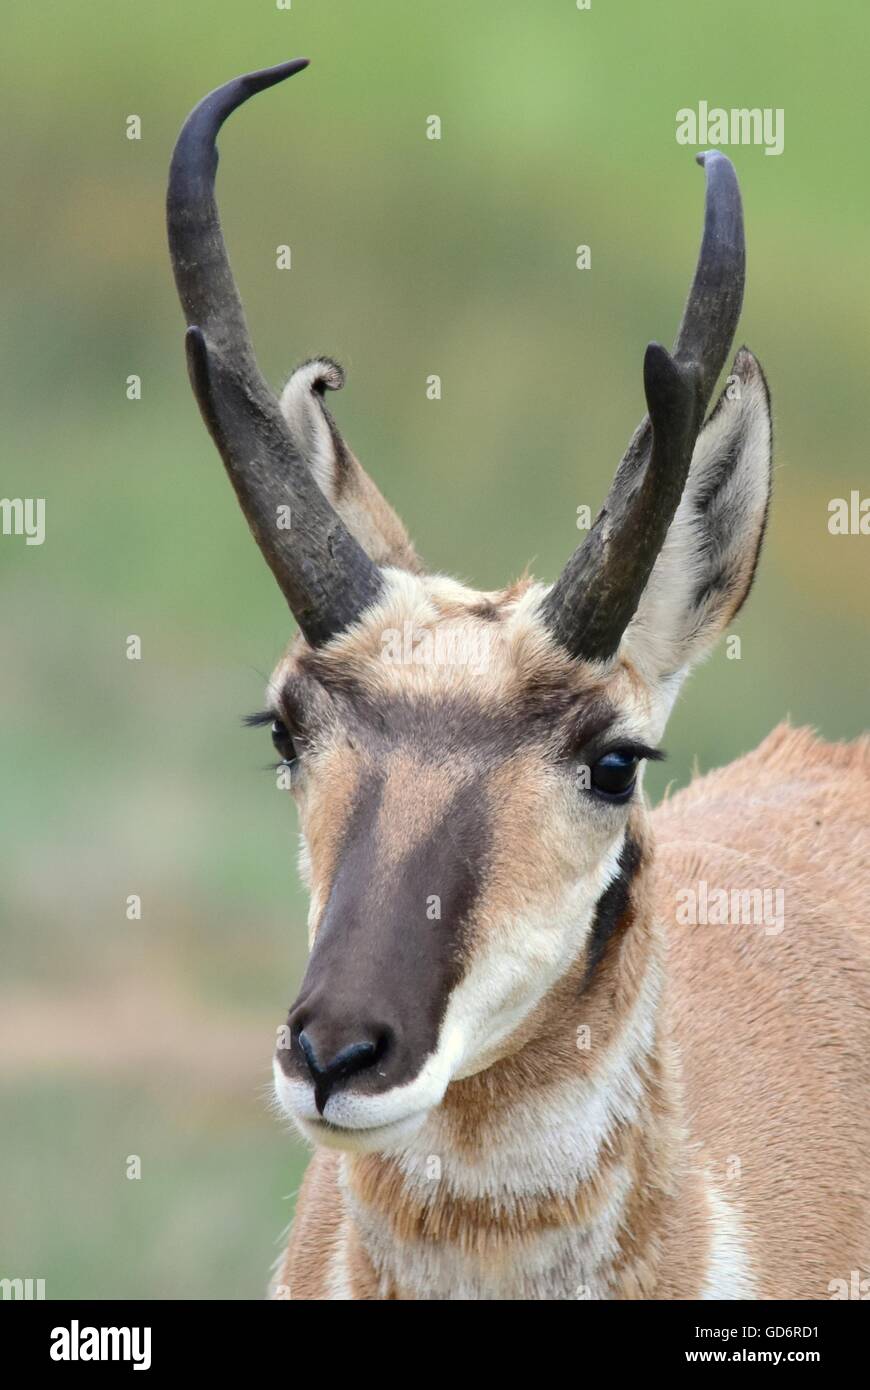 A male pronghorn at Arapaho National Wildlife Refuge July 5, 2016 in Walden, Colorado. The deer-like Pronghorn is the sole surviving member of an ancient family dating back 20 million years and the only animal in the world with branched horns and to shed its horns, as if they were antlers. The Pronghorn is the fastest animal in the western hemisphere, running in 20-foot bounds at up to 60 miles per hour. Stock Photo